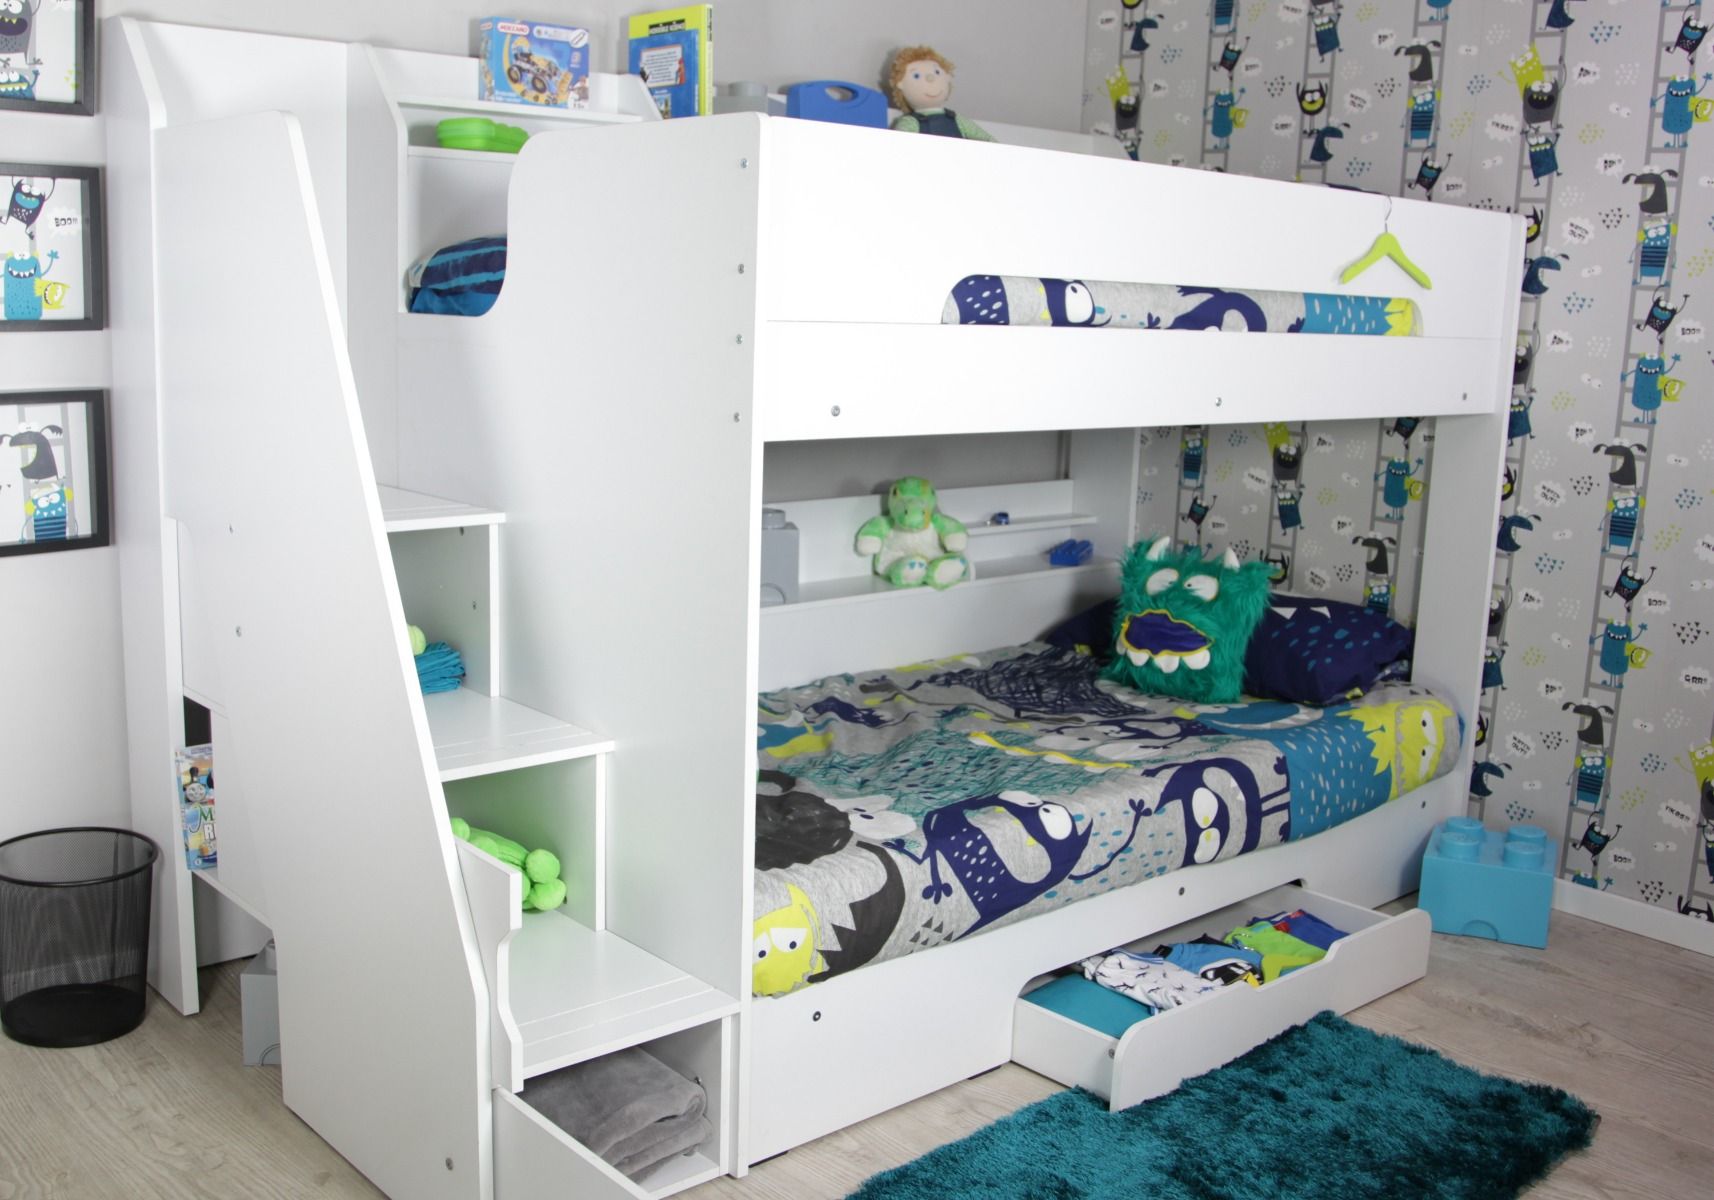 Flair Furnishings Slick Staircase Bunk, Bunk Beds White With Stairs